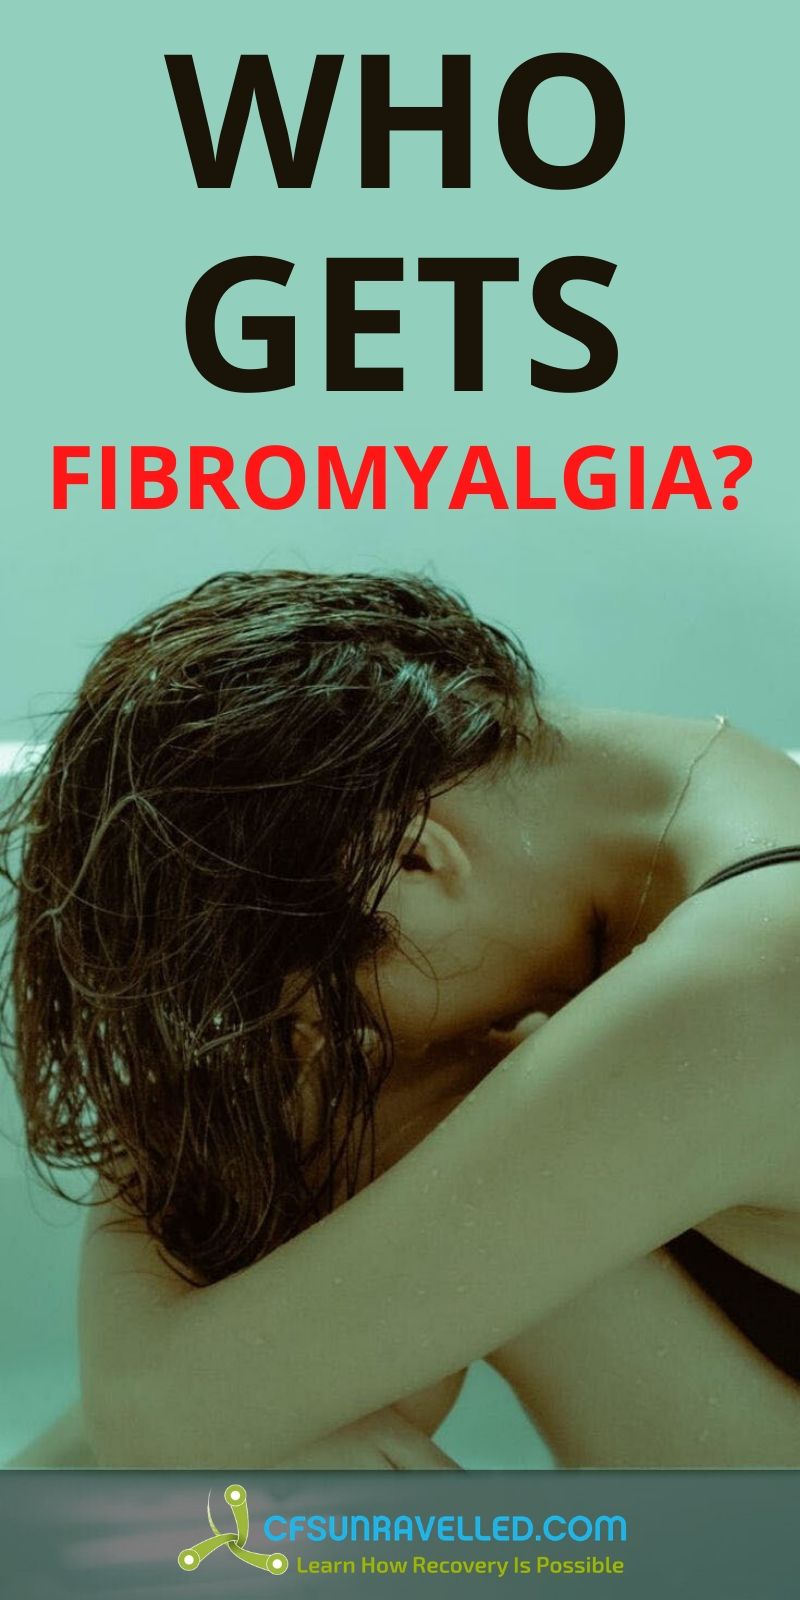 Woman in bath tub  with who gets fibromyalgia text above